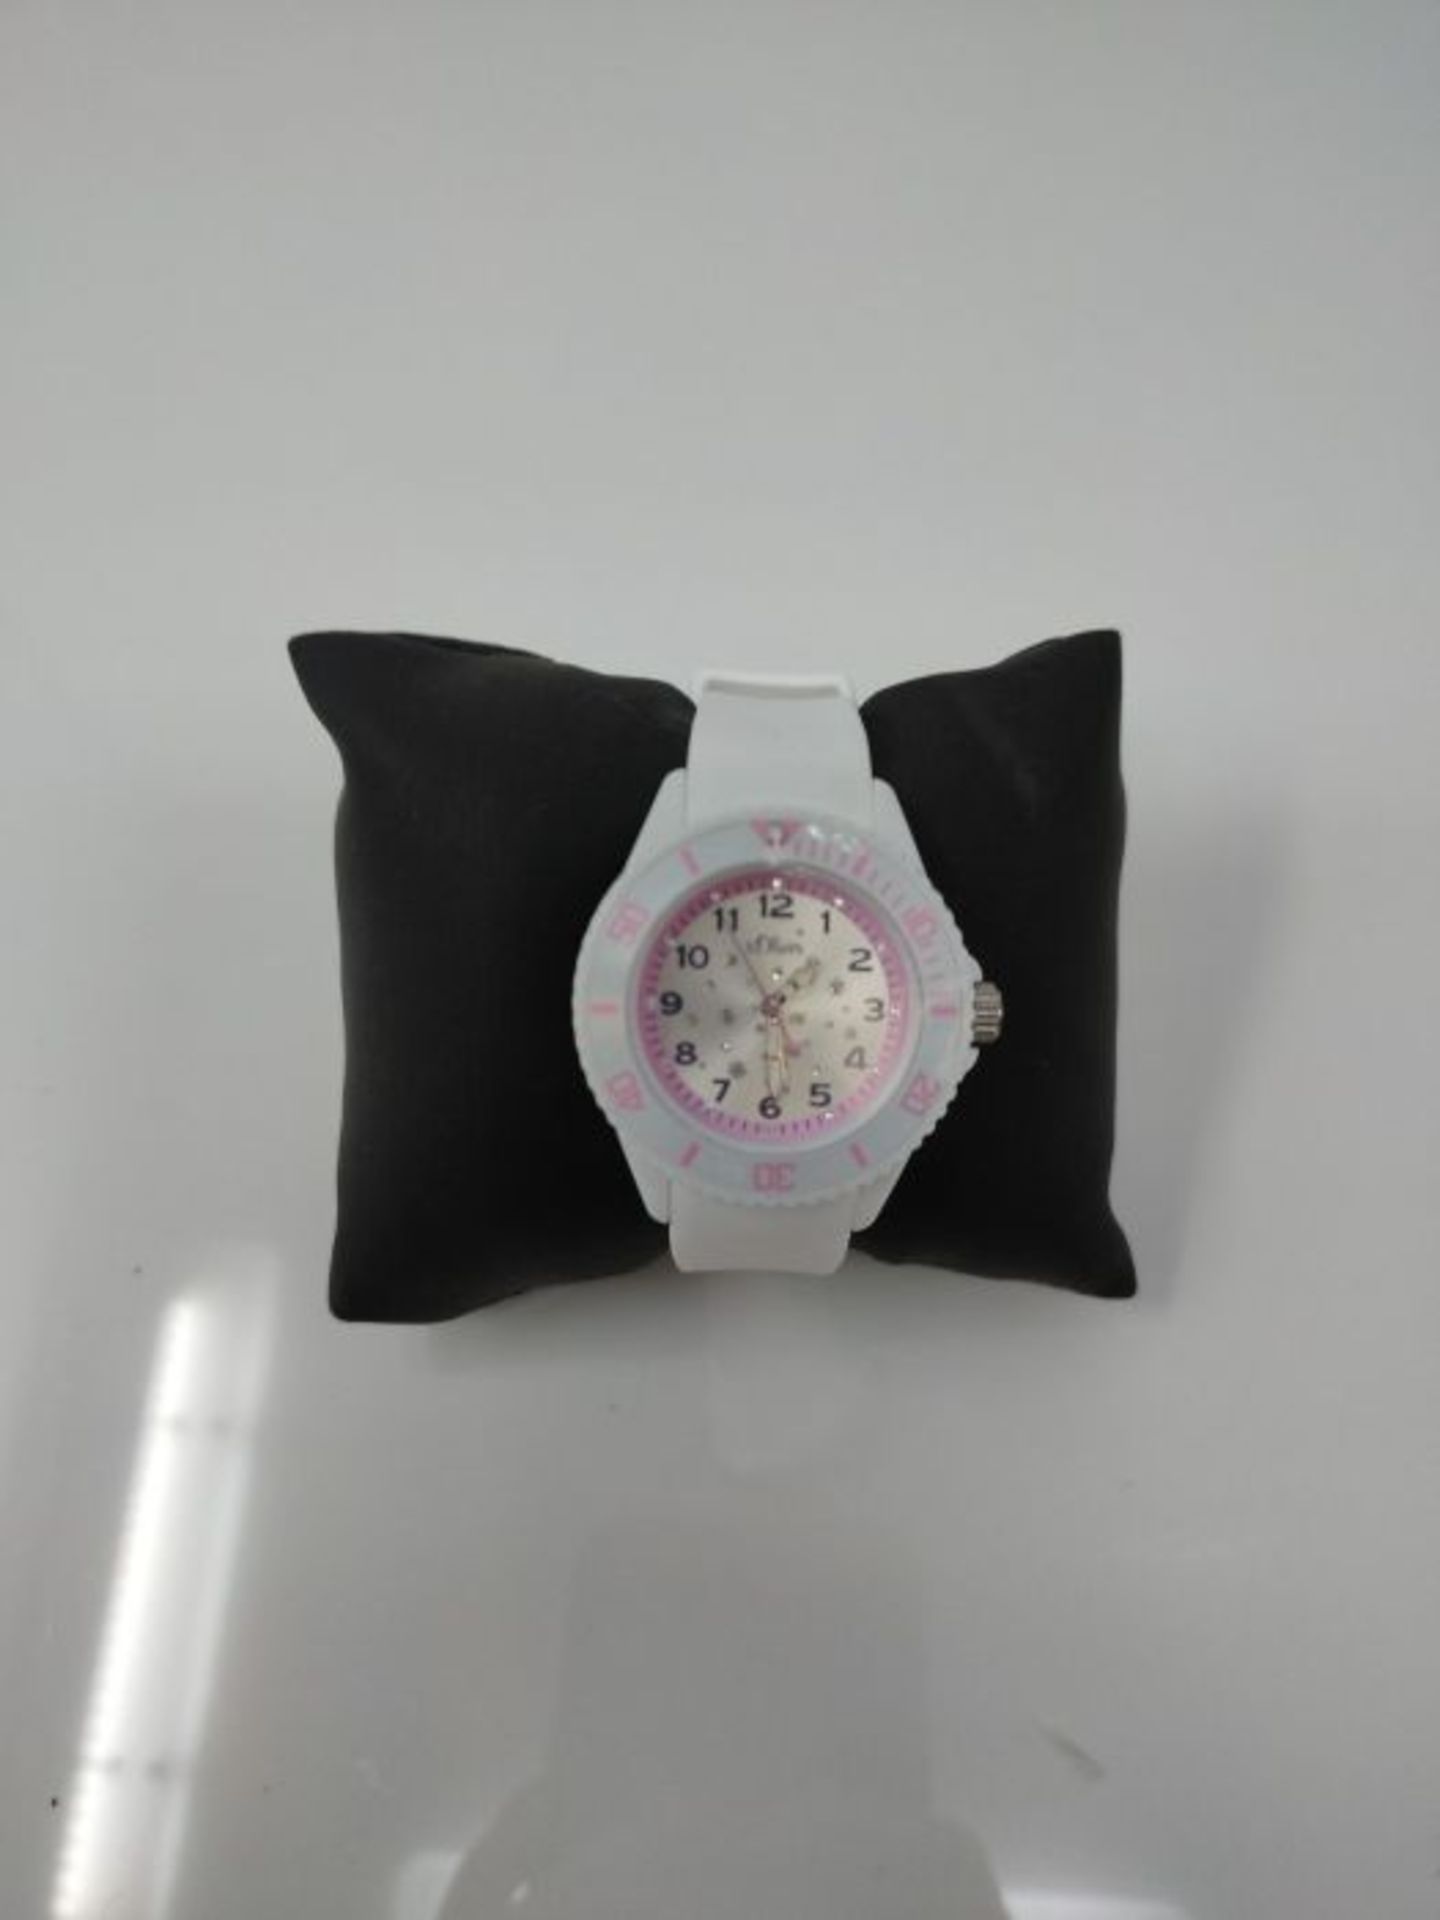 s.Oliver Time children's analogue quartz watch with silicone bracelet - Image 2 of 2